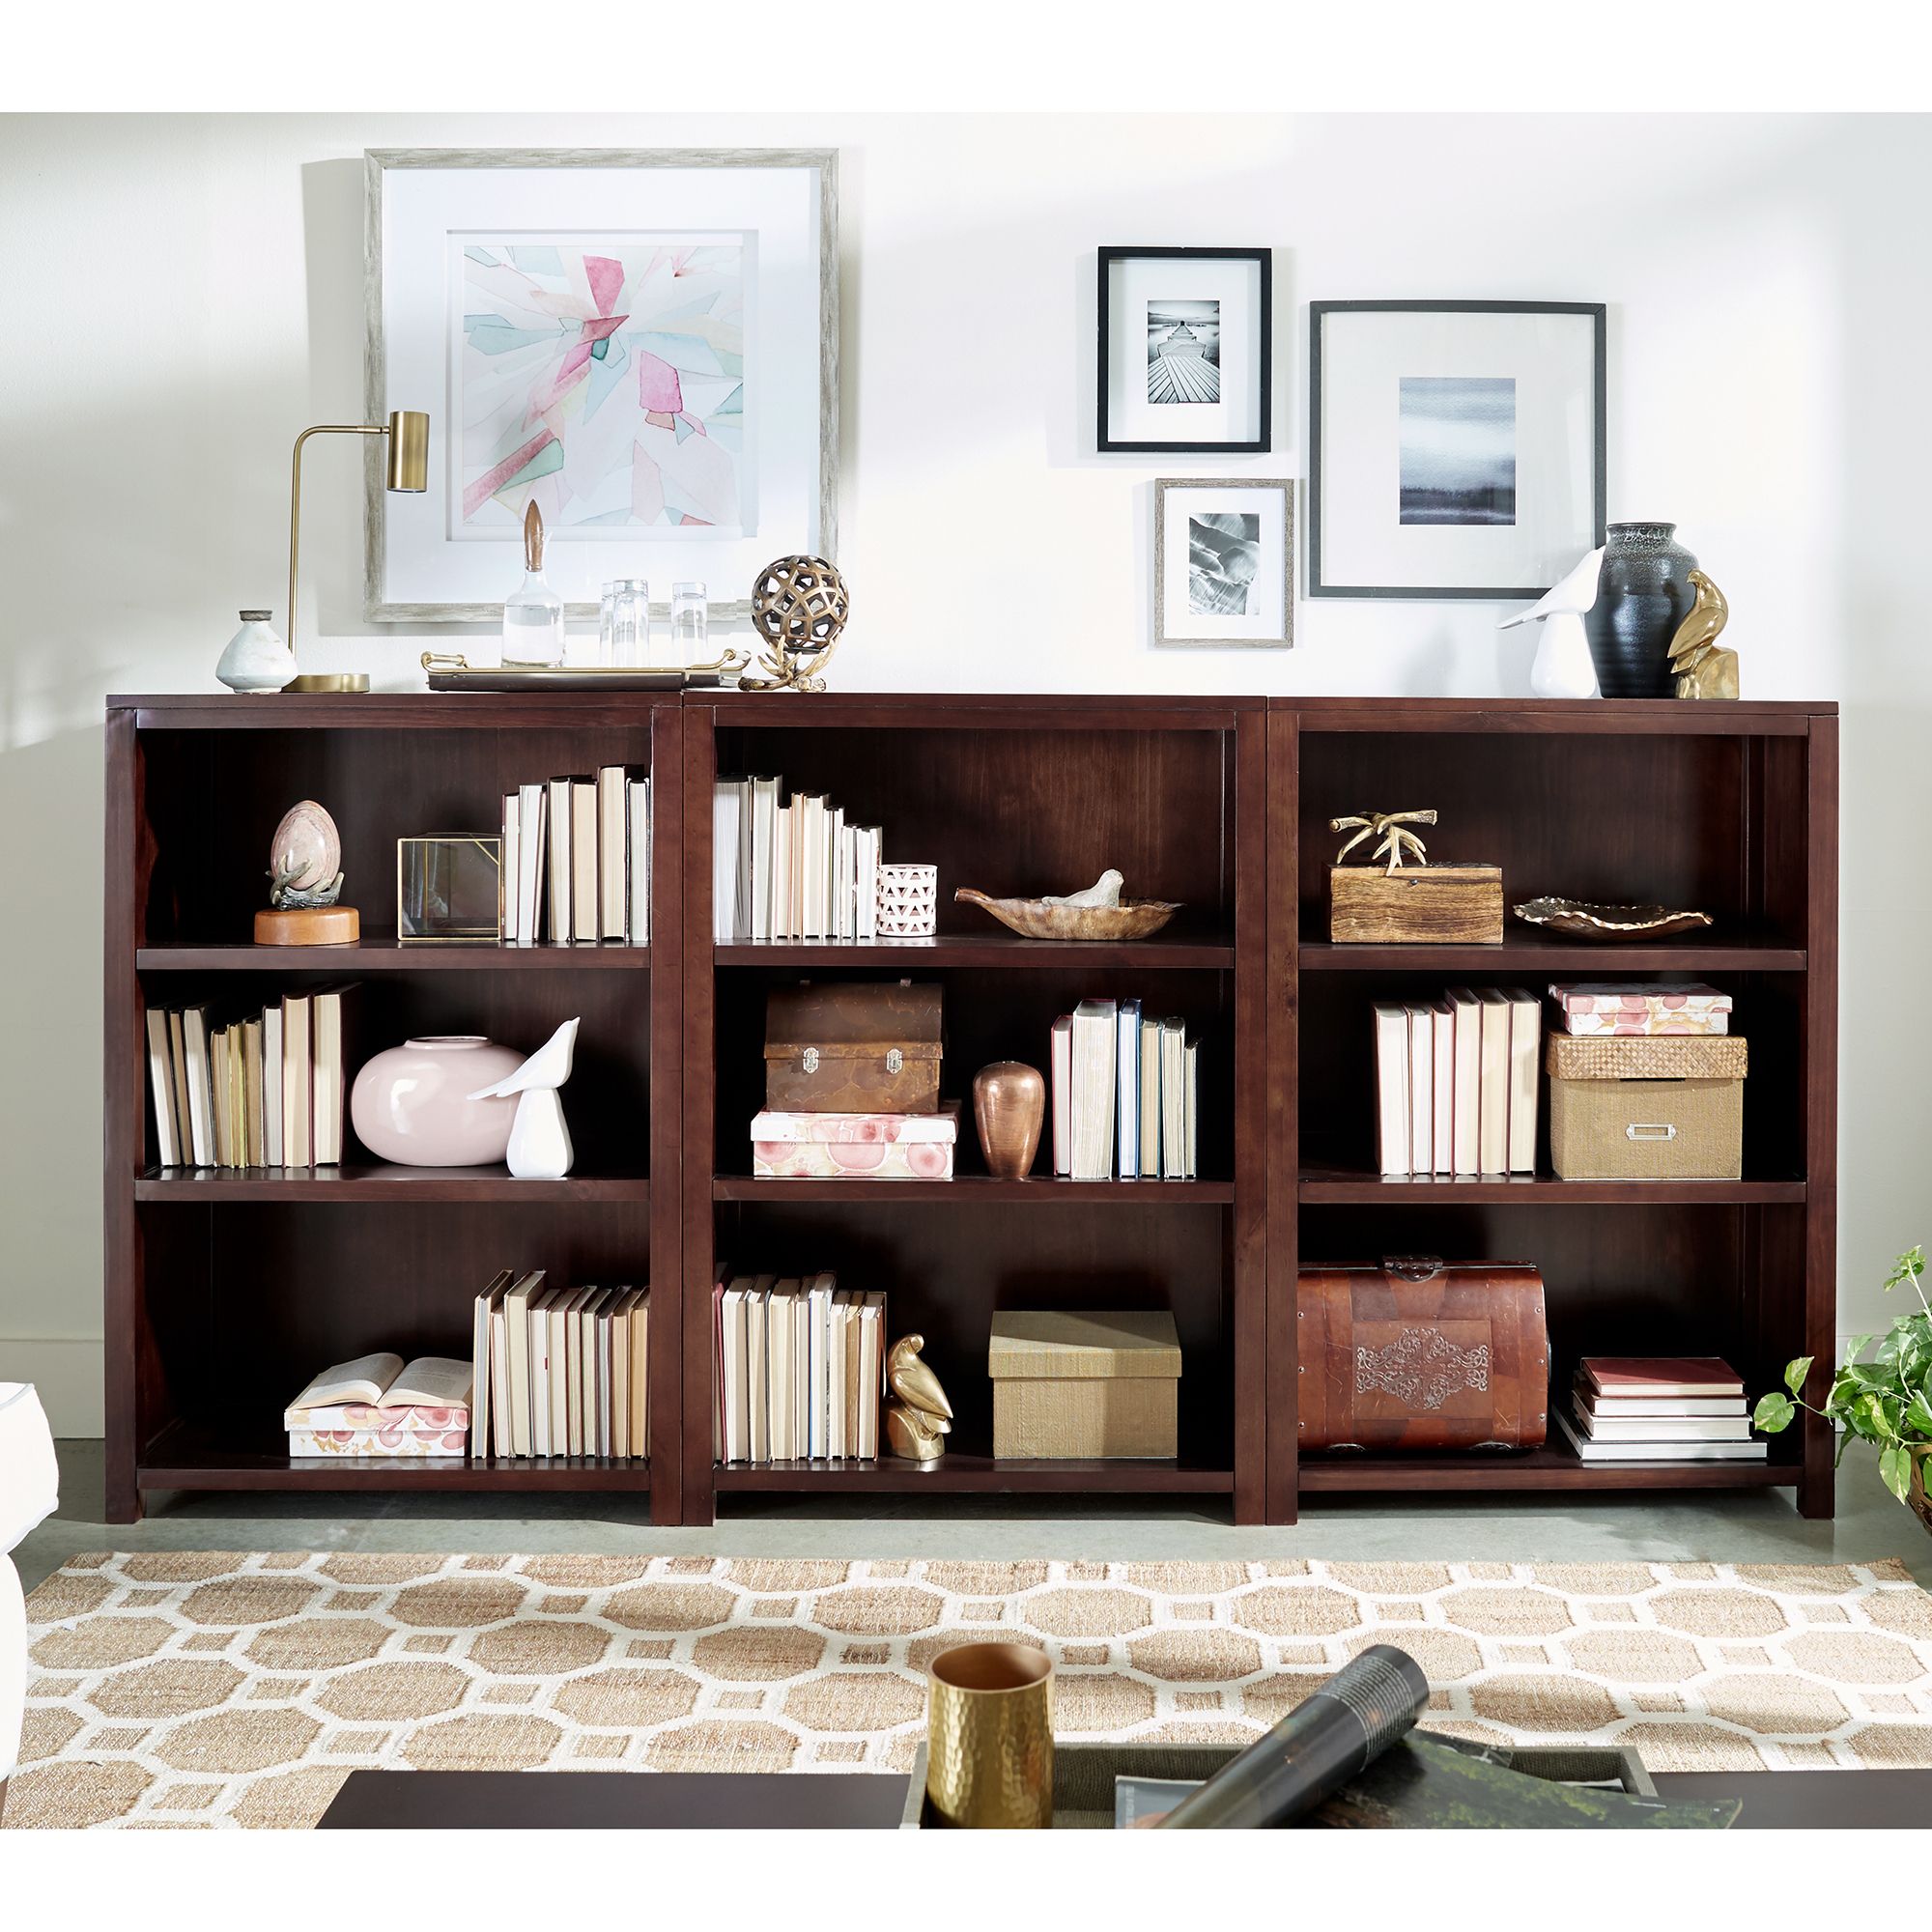 3 Piece 47" Bookshelf Set | Epoch Design Inside Mirrored Bookcases With 3 Shelves (View 15 of 15)